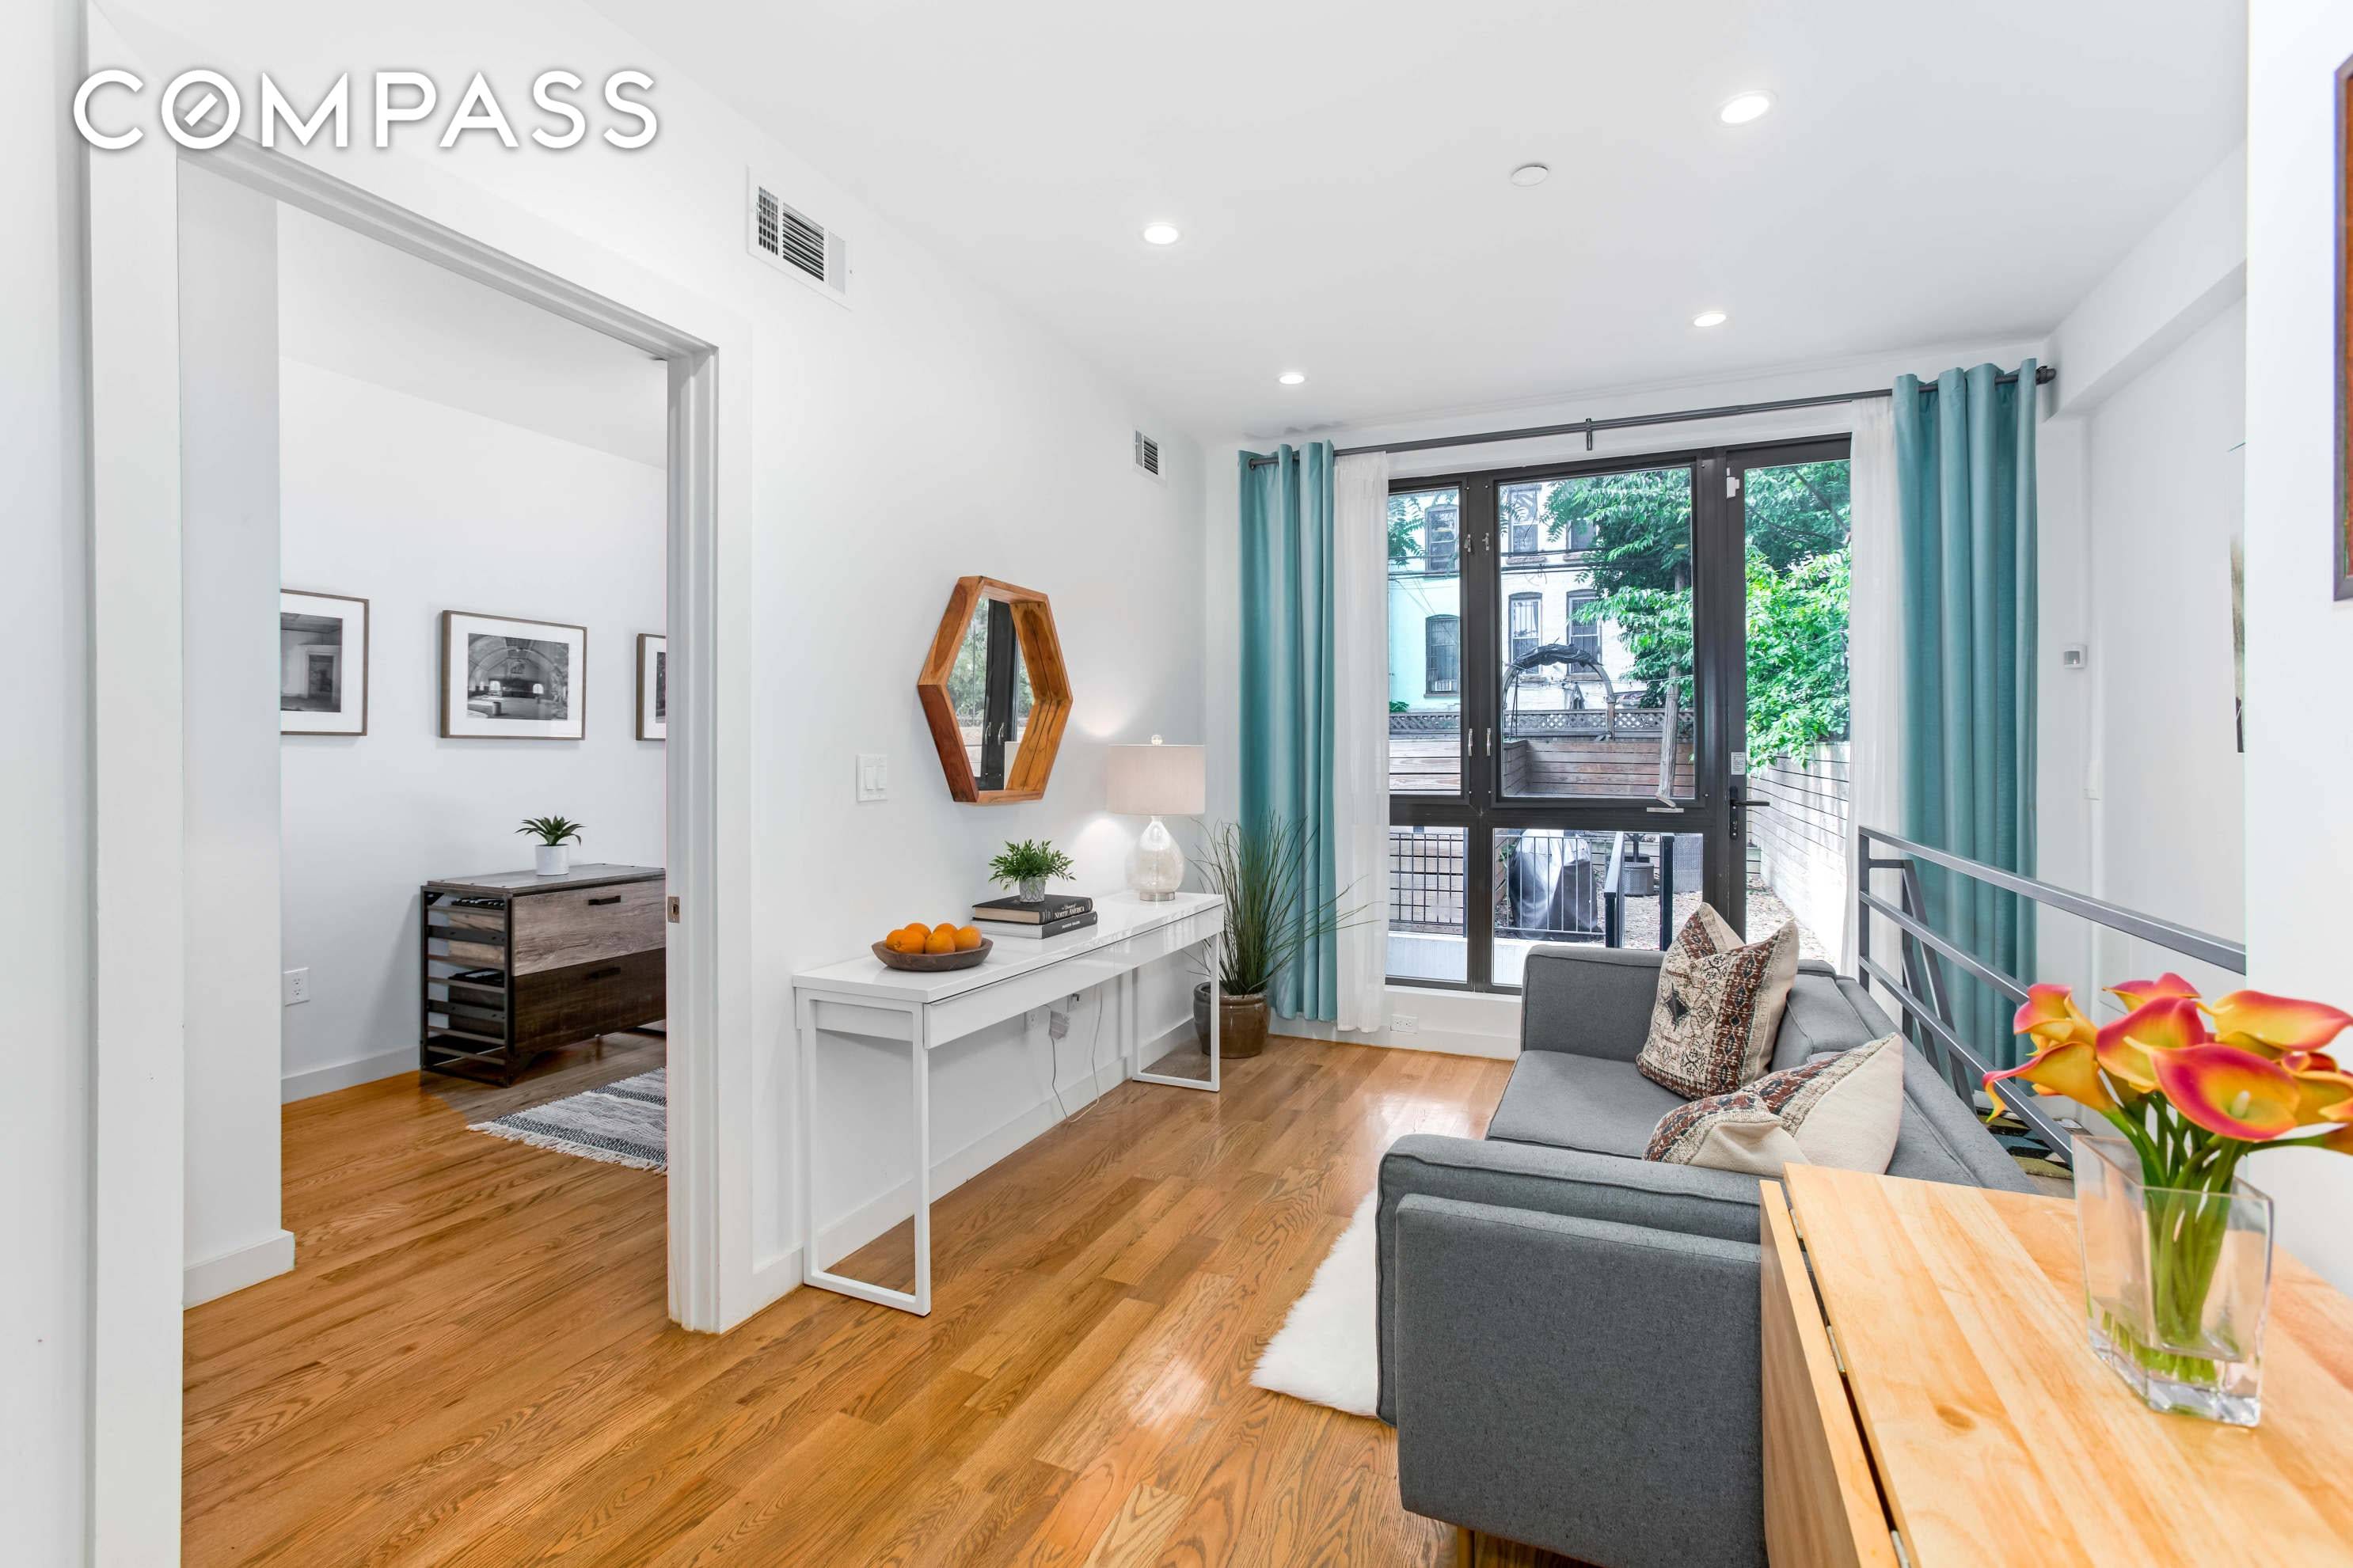 443 Bainbridge Street is located on a quintessential tree lined block in picturesque Stuyvesant Heights.